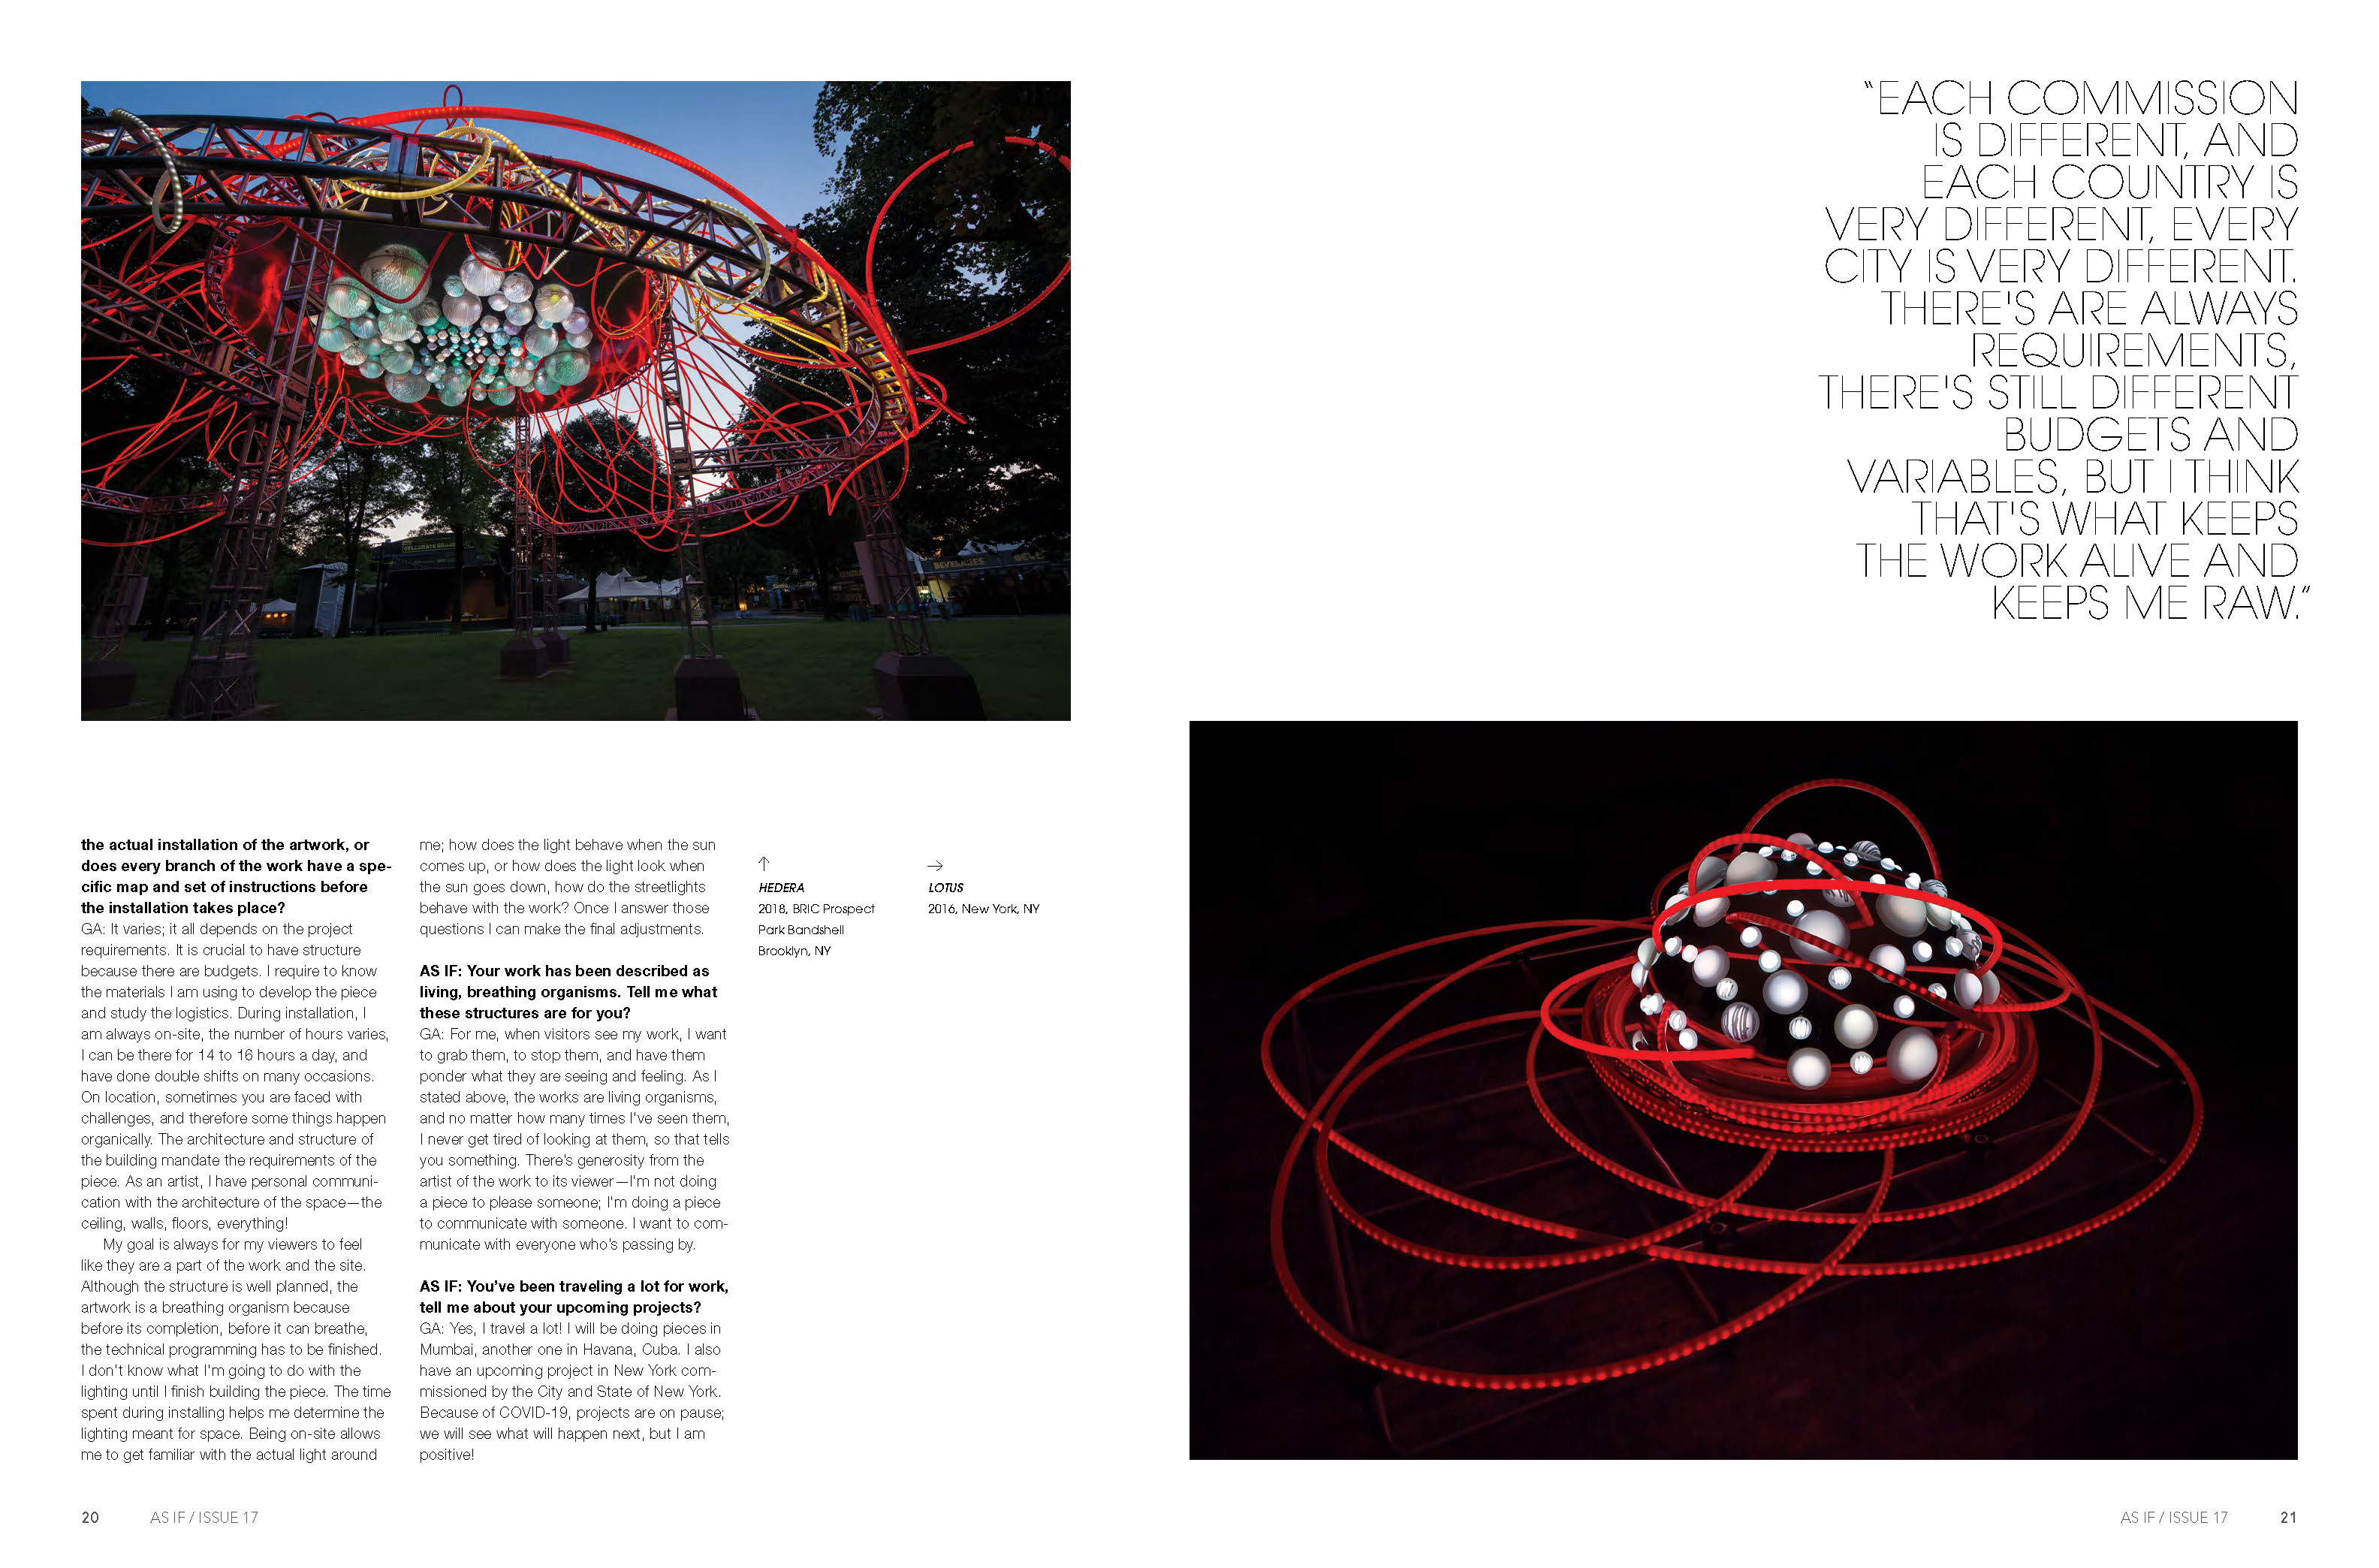 As IF Magazine issue 18 page 10 featuring the work of momental light sculpture artist Grimanesa Amoros Hedera at prospect park